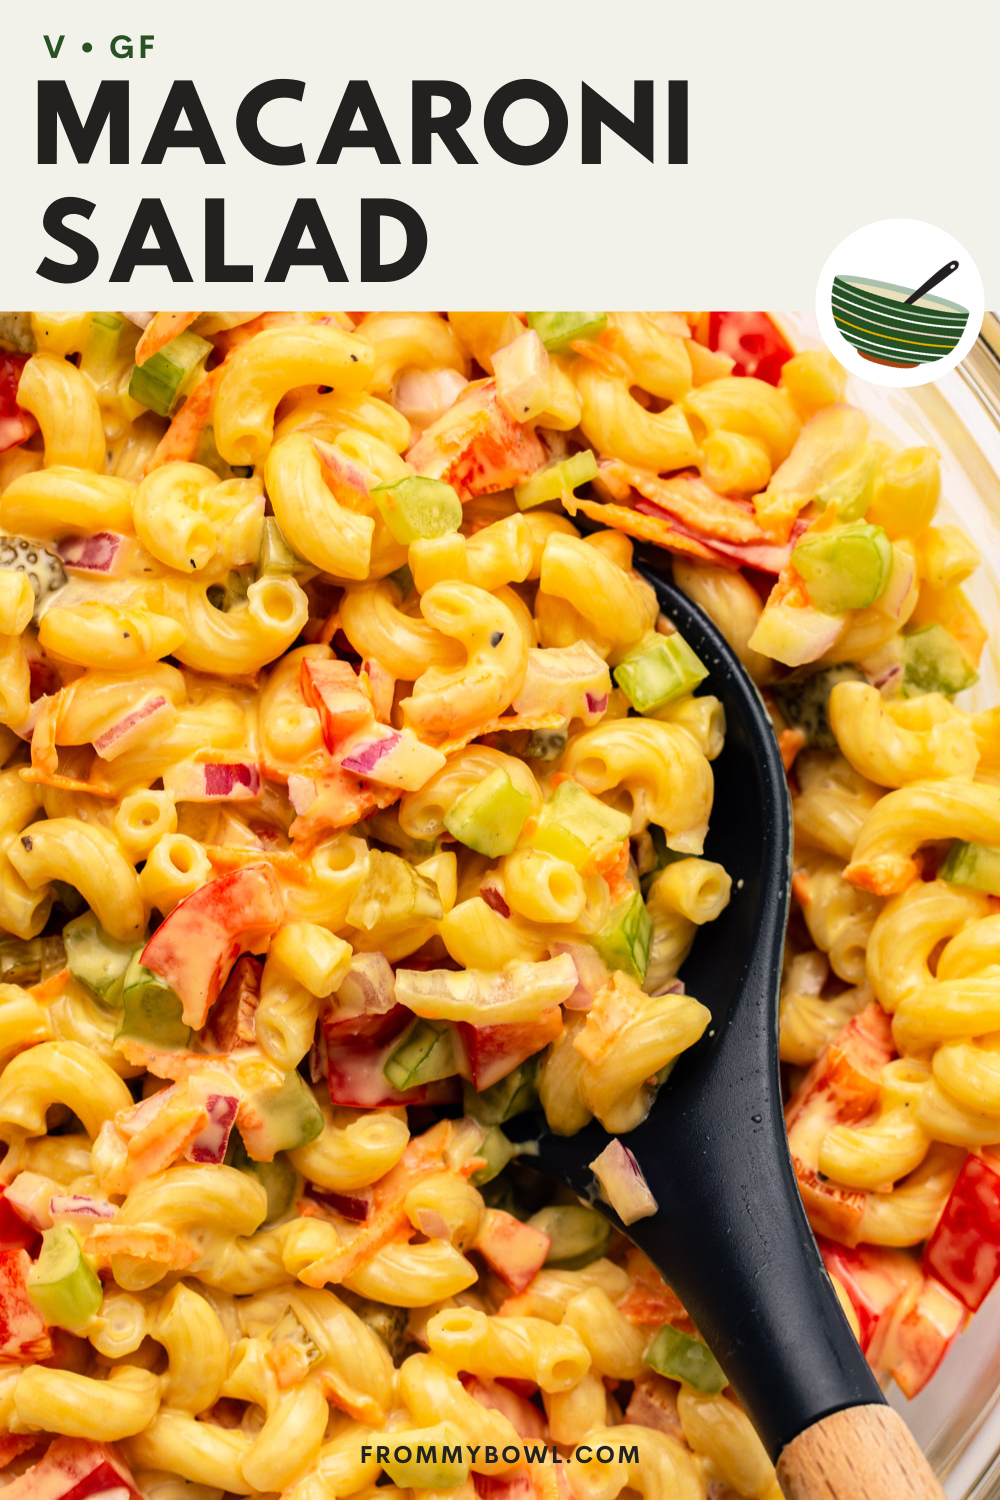 a zoomed in image of macaroni pasta salad with a plastic spoon scooping up a portion